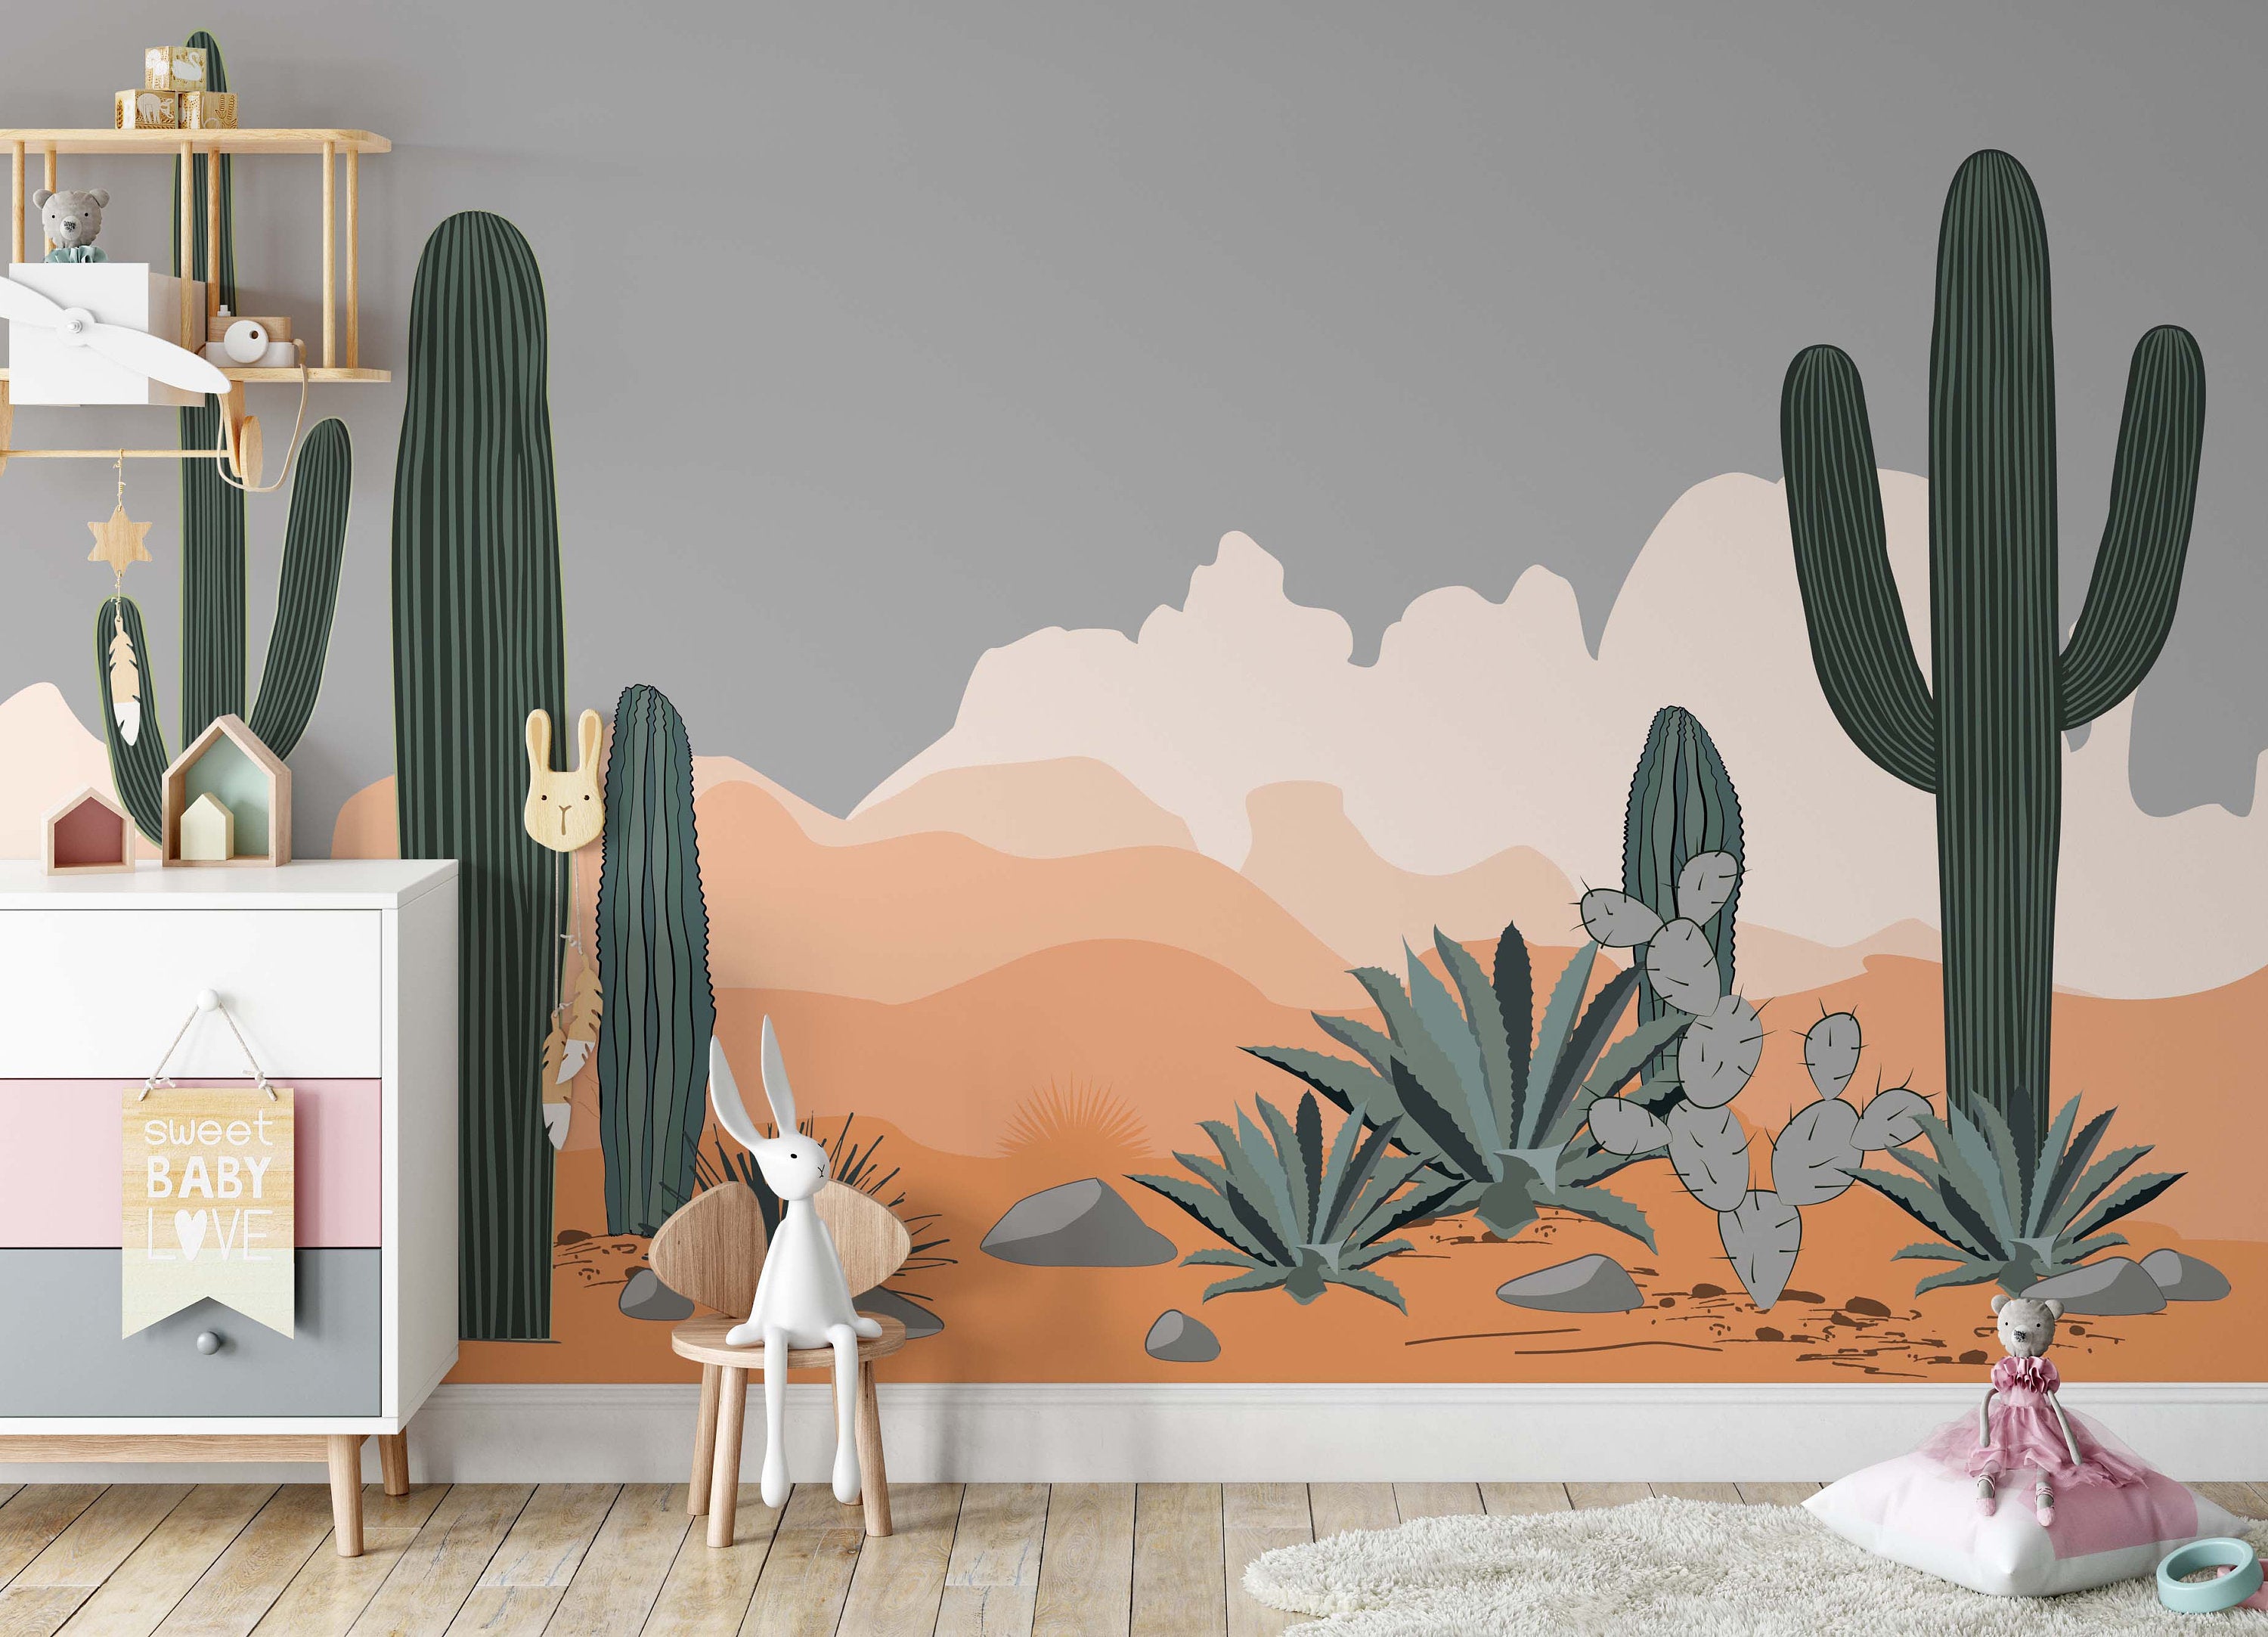 Desert Agave and Saguaro Cacti Mountains Background Wallpaper Nursery Children Kids Room Mural Home Decor Wall Art Removable